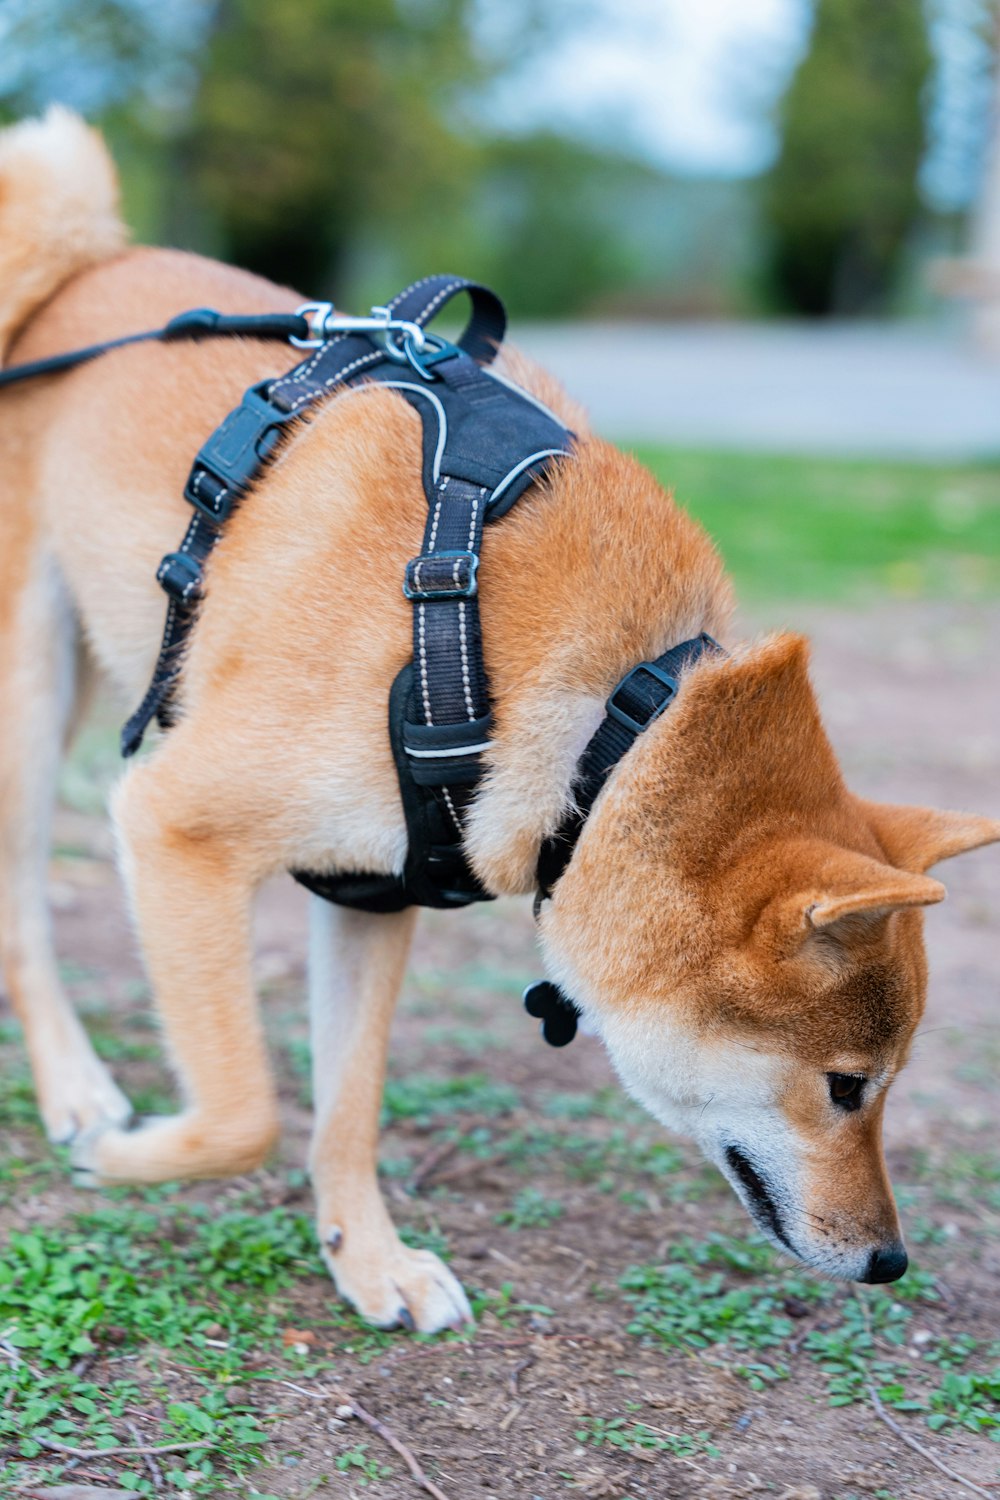 a dog with a harness on sniffing the ground